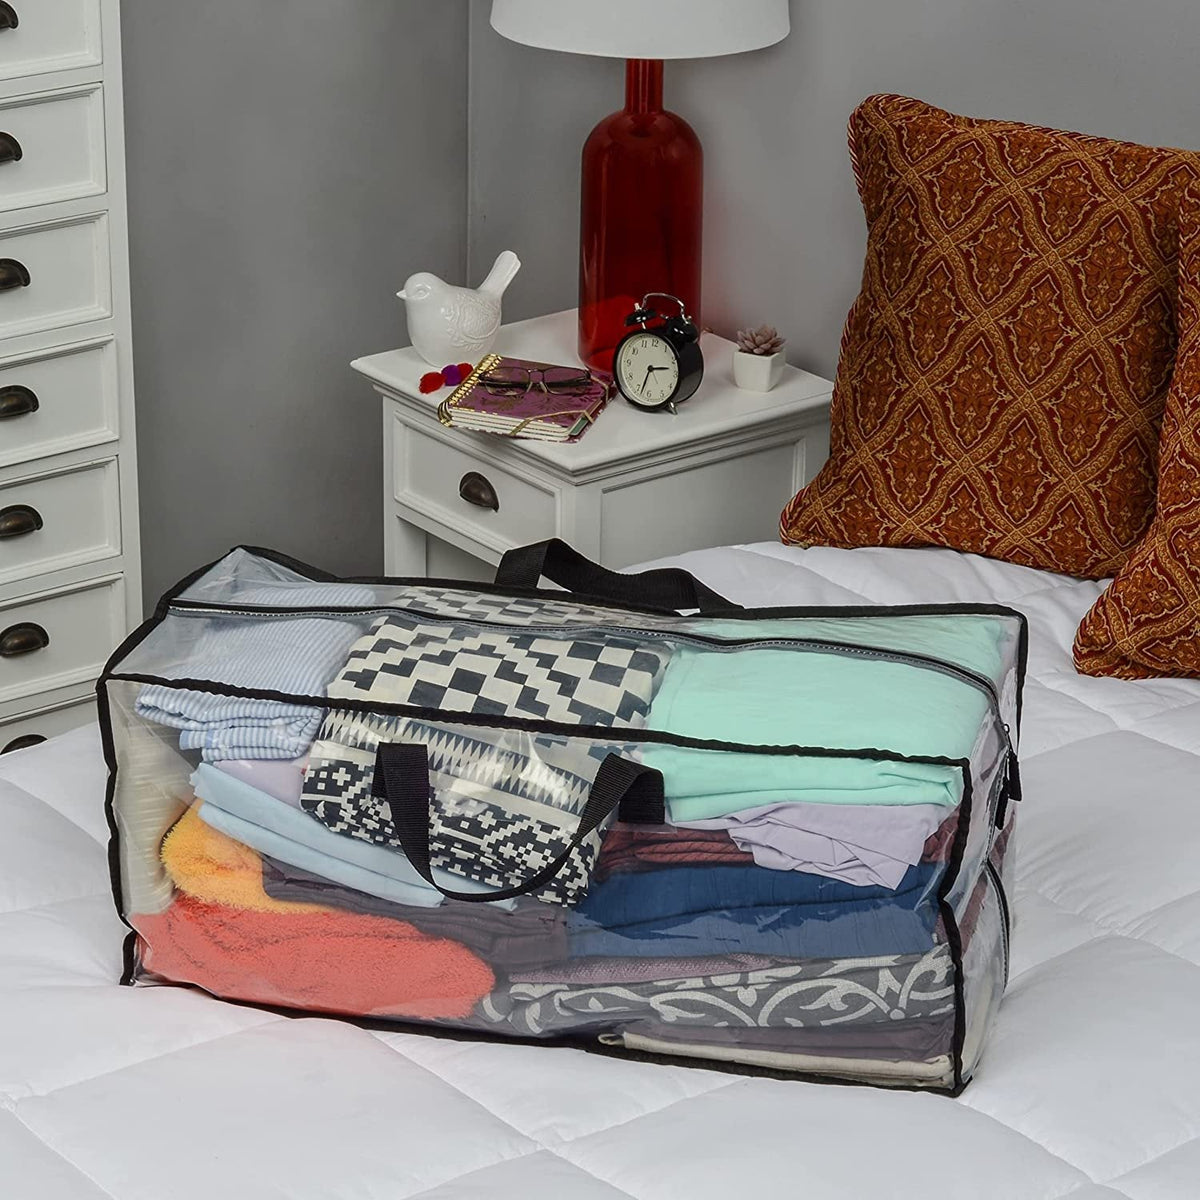 These Storage Bags for Moving Are Just $6 Apiece at